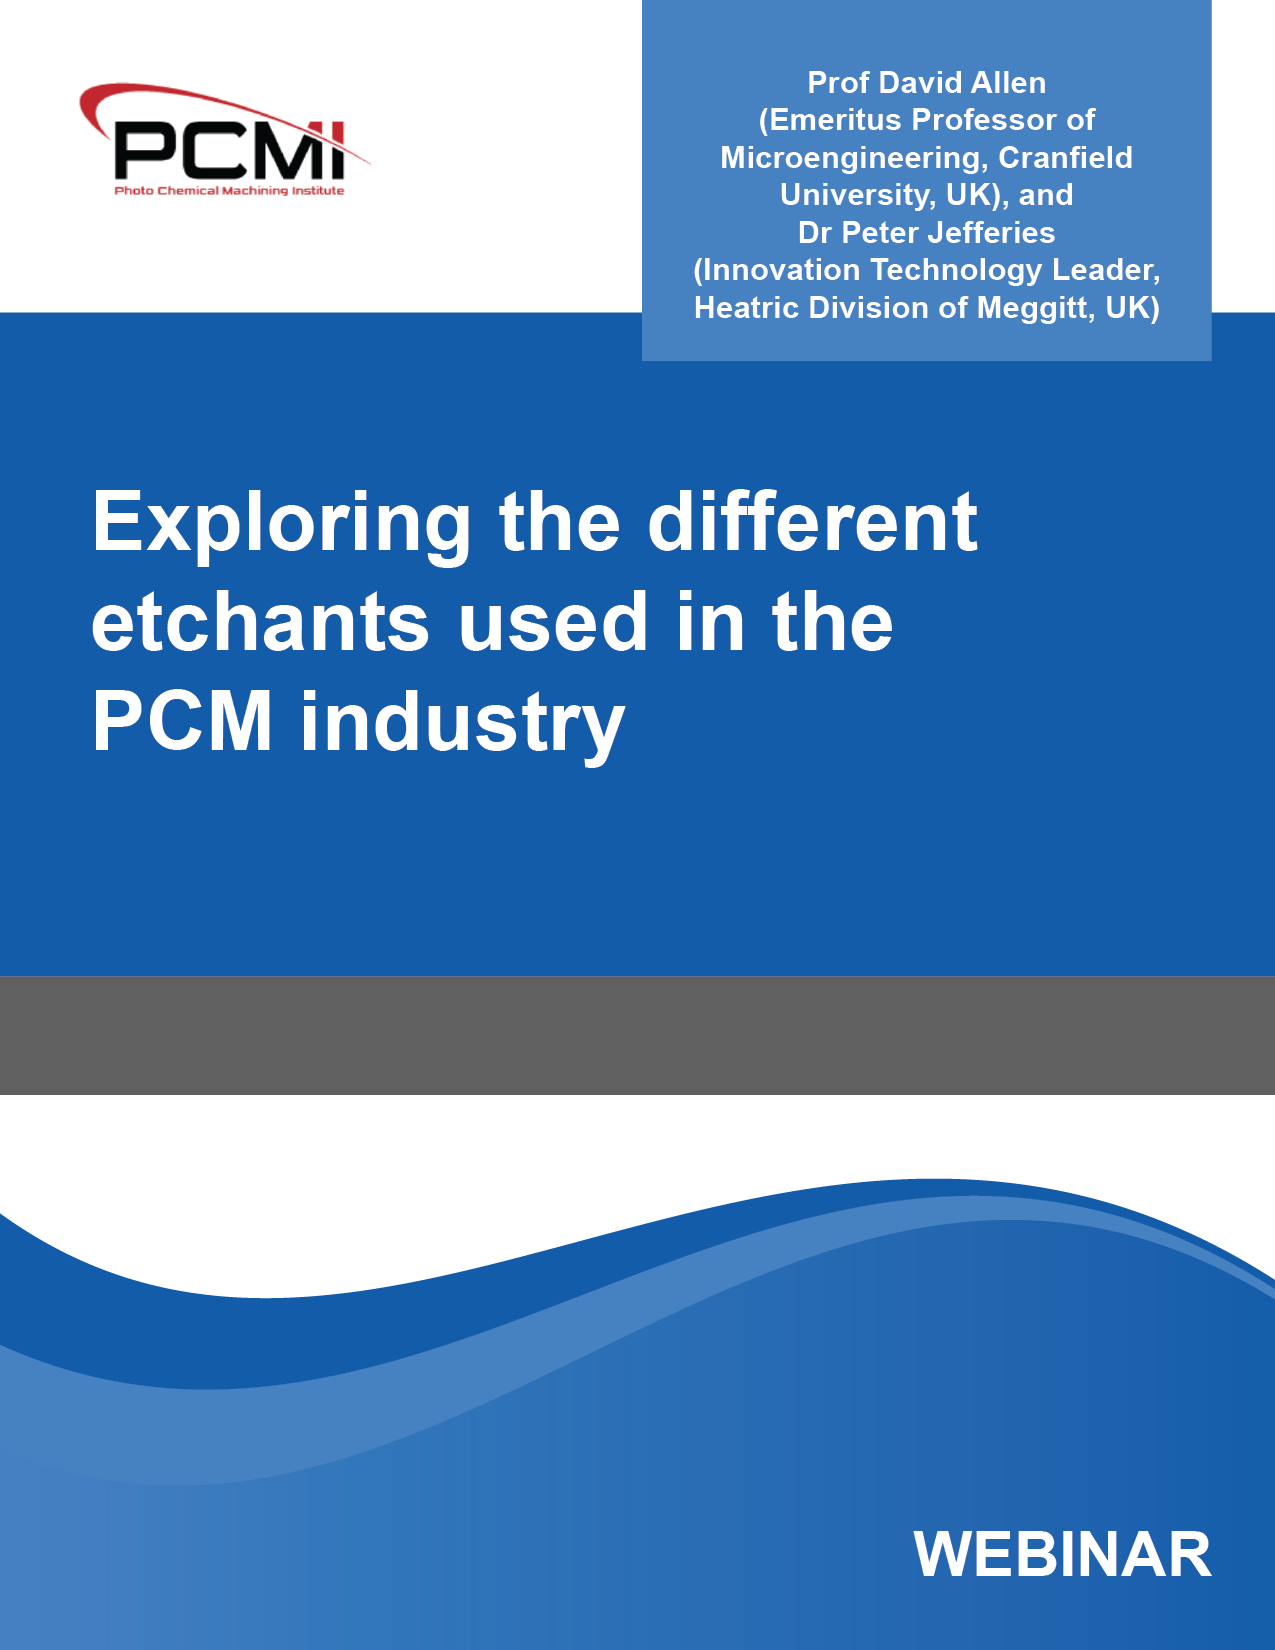 Exploring the different etchants used in the PCM industry